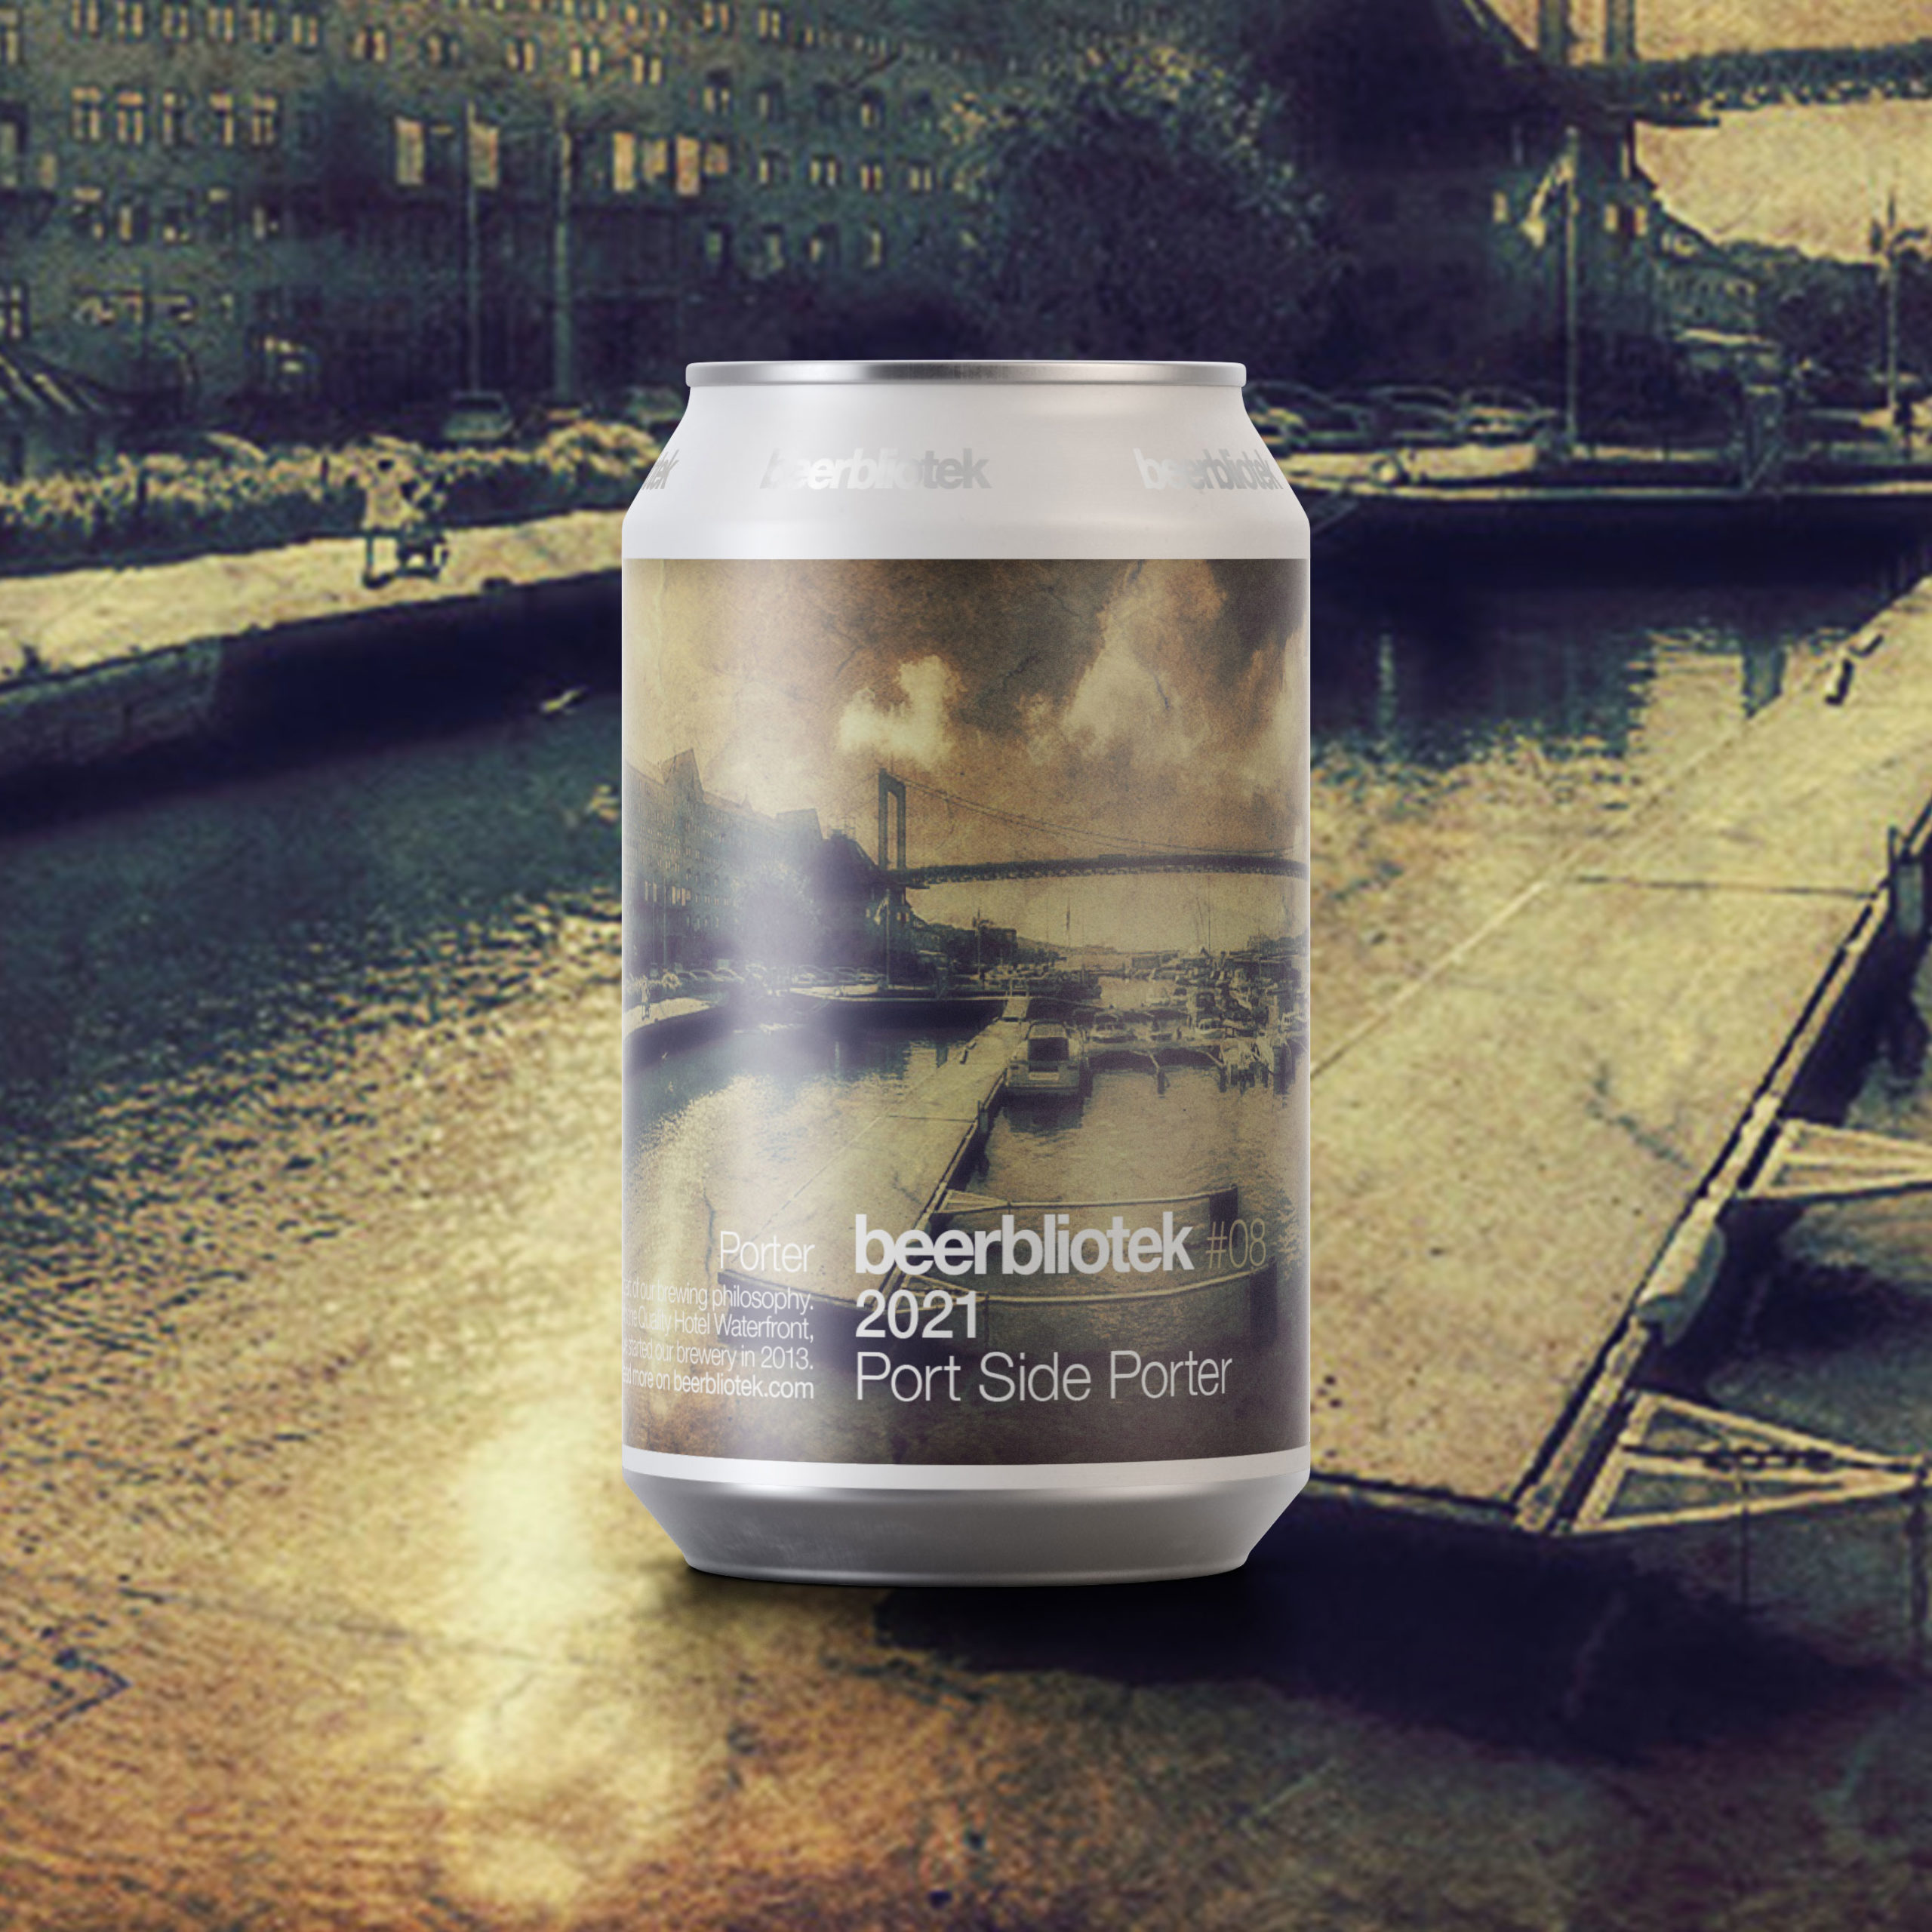 A marketing can packshot of Port Side Porter, a Porter brewed in Gothenburg, by Swedish Craft Brewery Beerbliotek.First brewed in 2013, recreated for Hotel waterfront, Gothenburg.